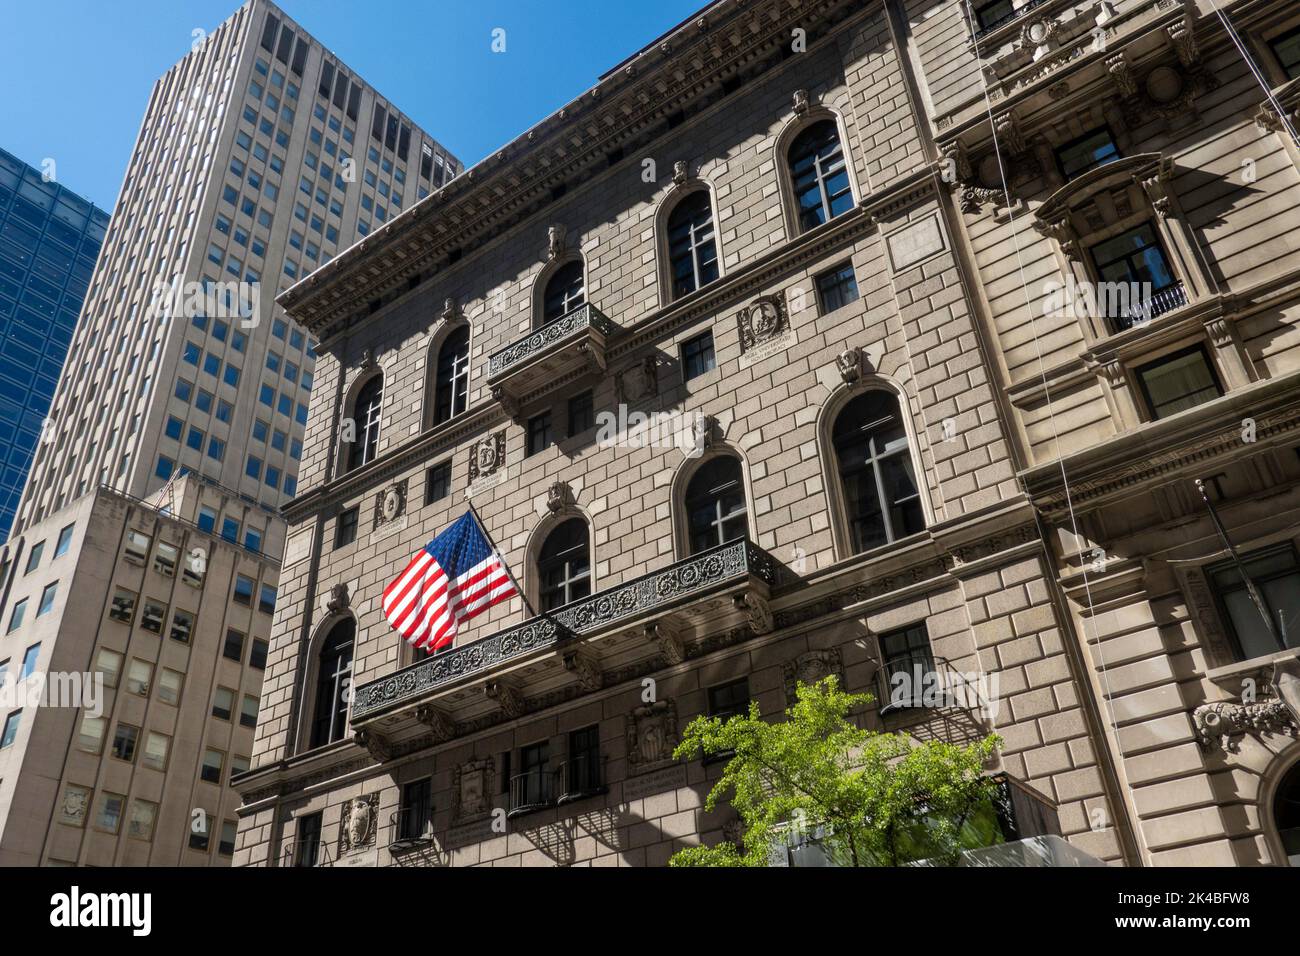 The University Club of New York is a private social club located at 1 West 54th Street on Fifth Avenue in Manhattan, New York City, USA  2022 Stock Photo